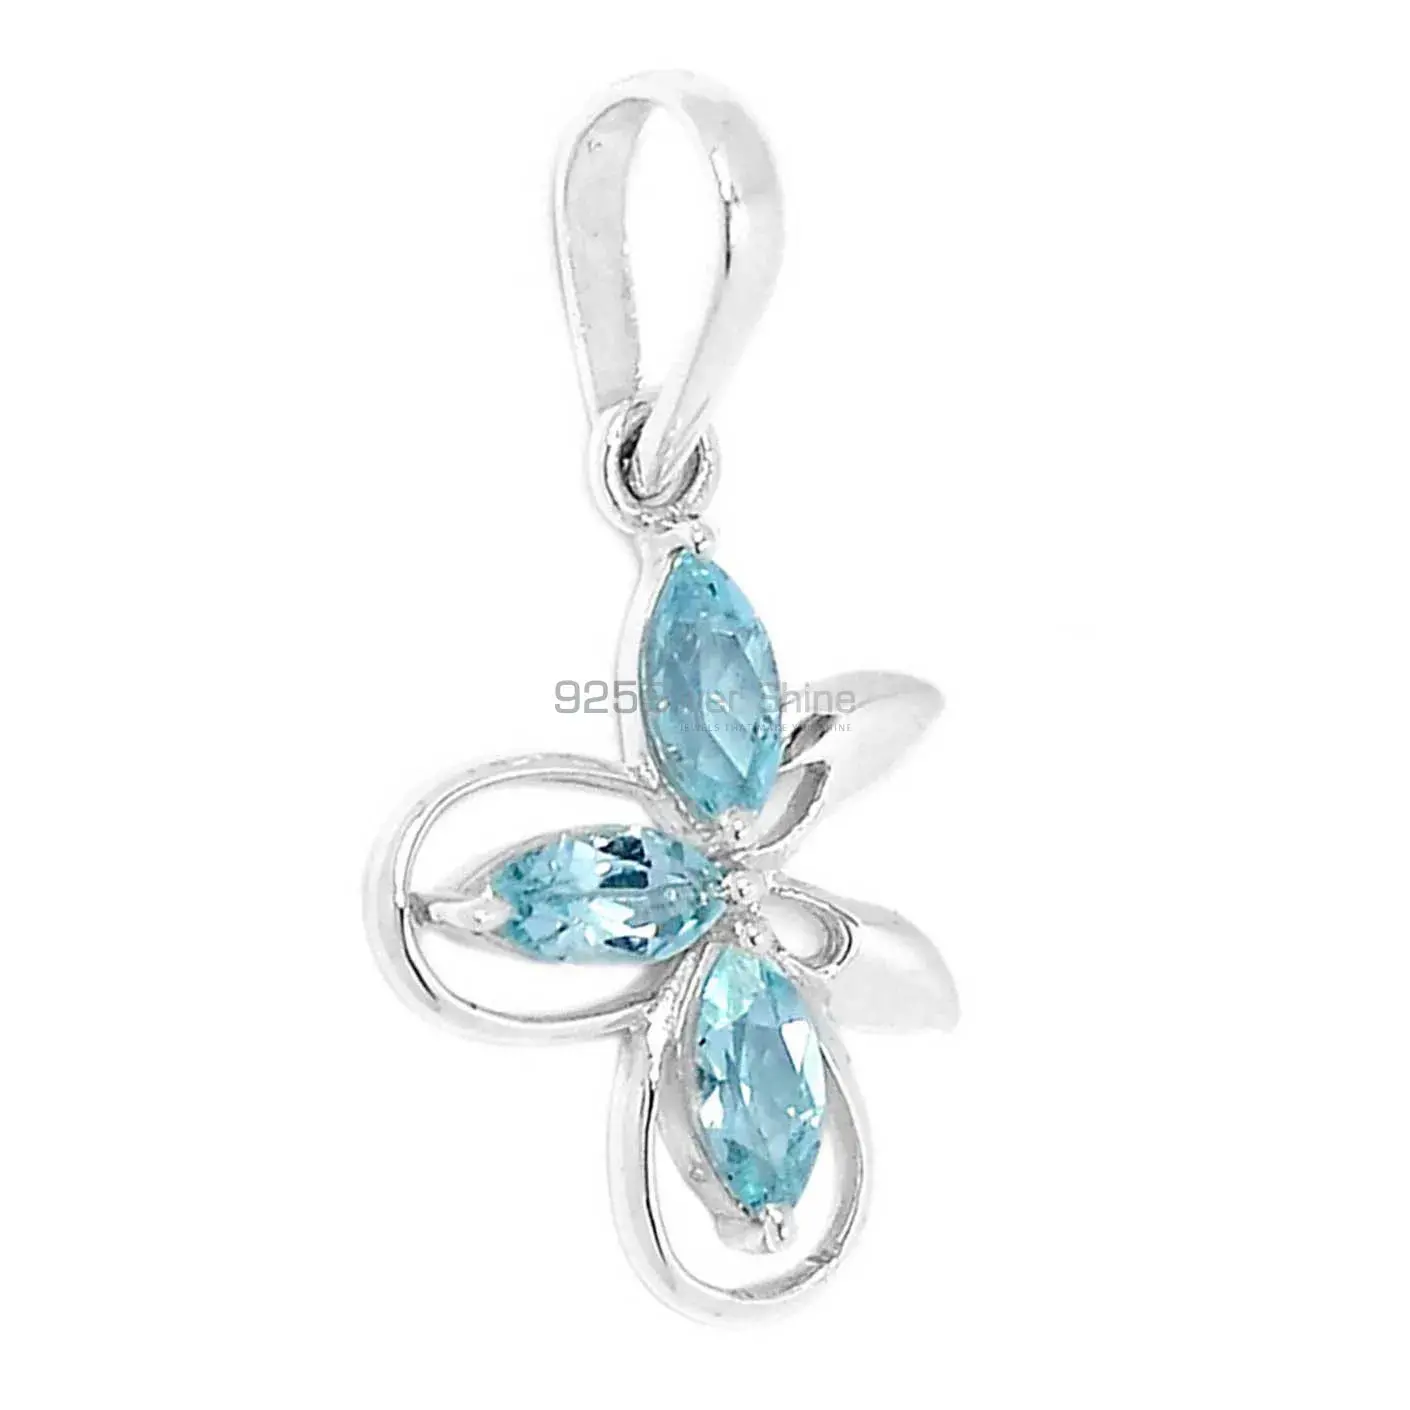 High Quality Solid Sterling Silver Handmade Pendants In Blue Topaz Gemstone Jewelry 925SP292-6_0